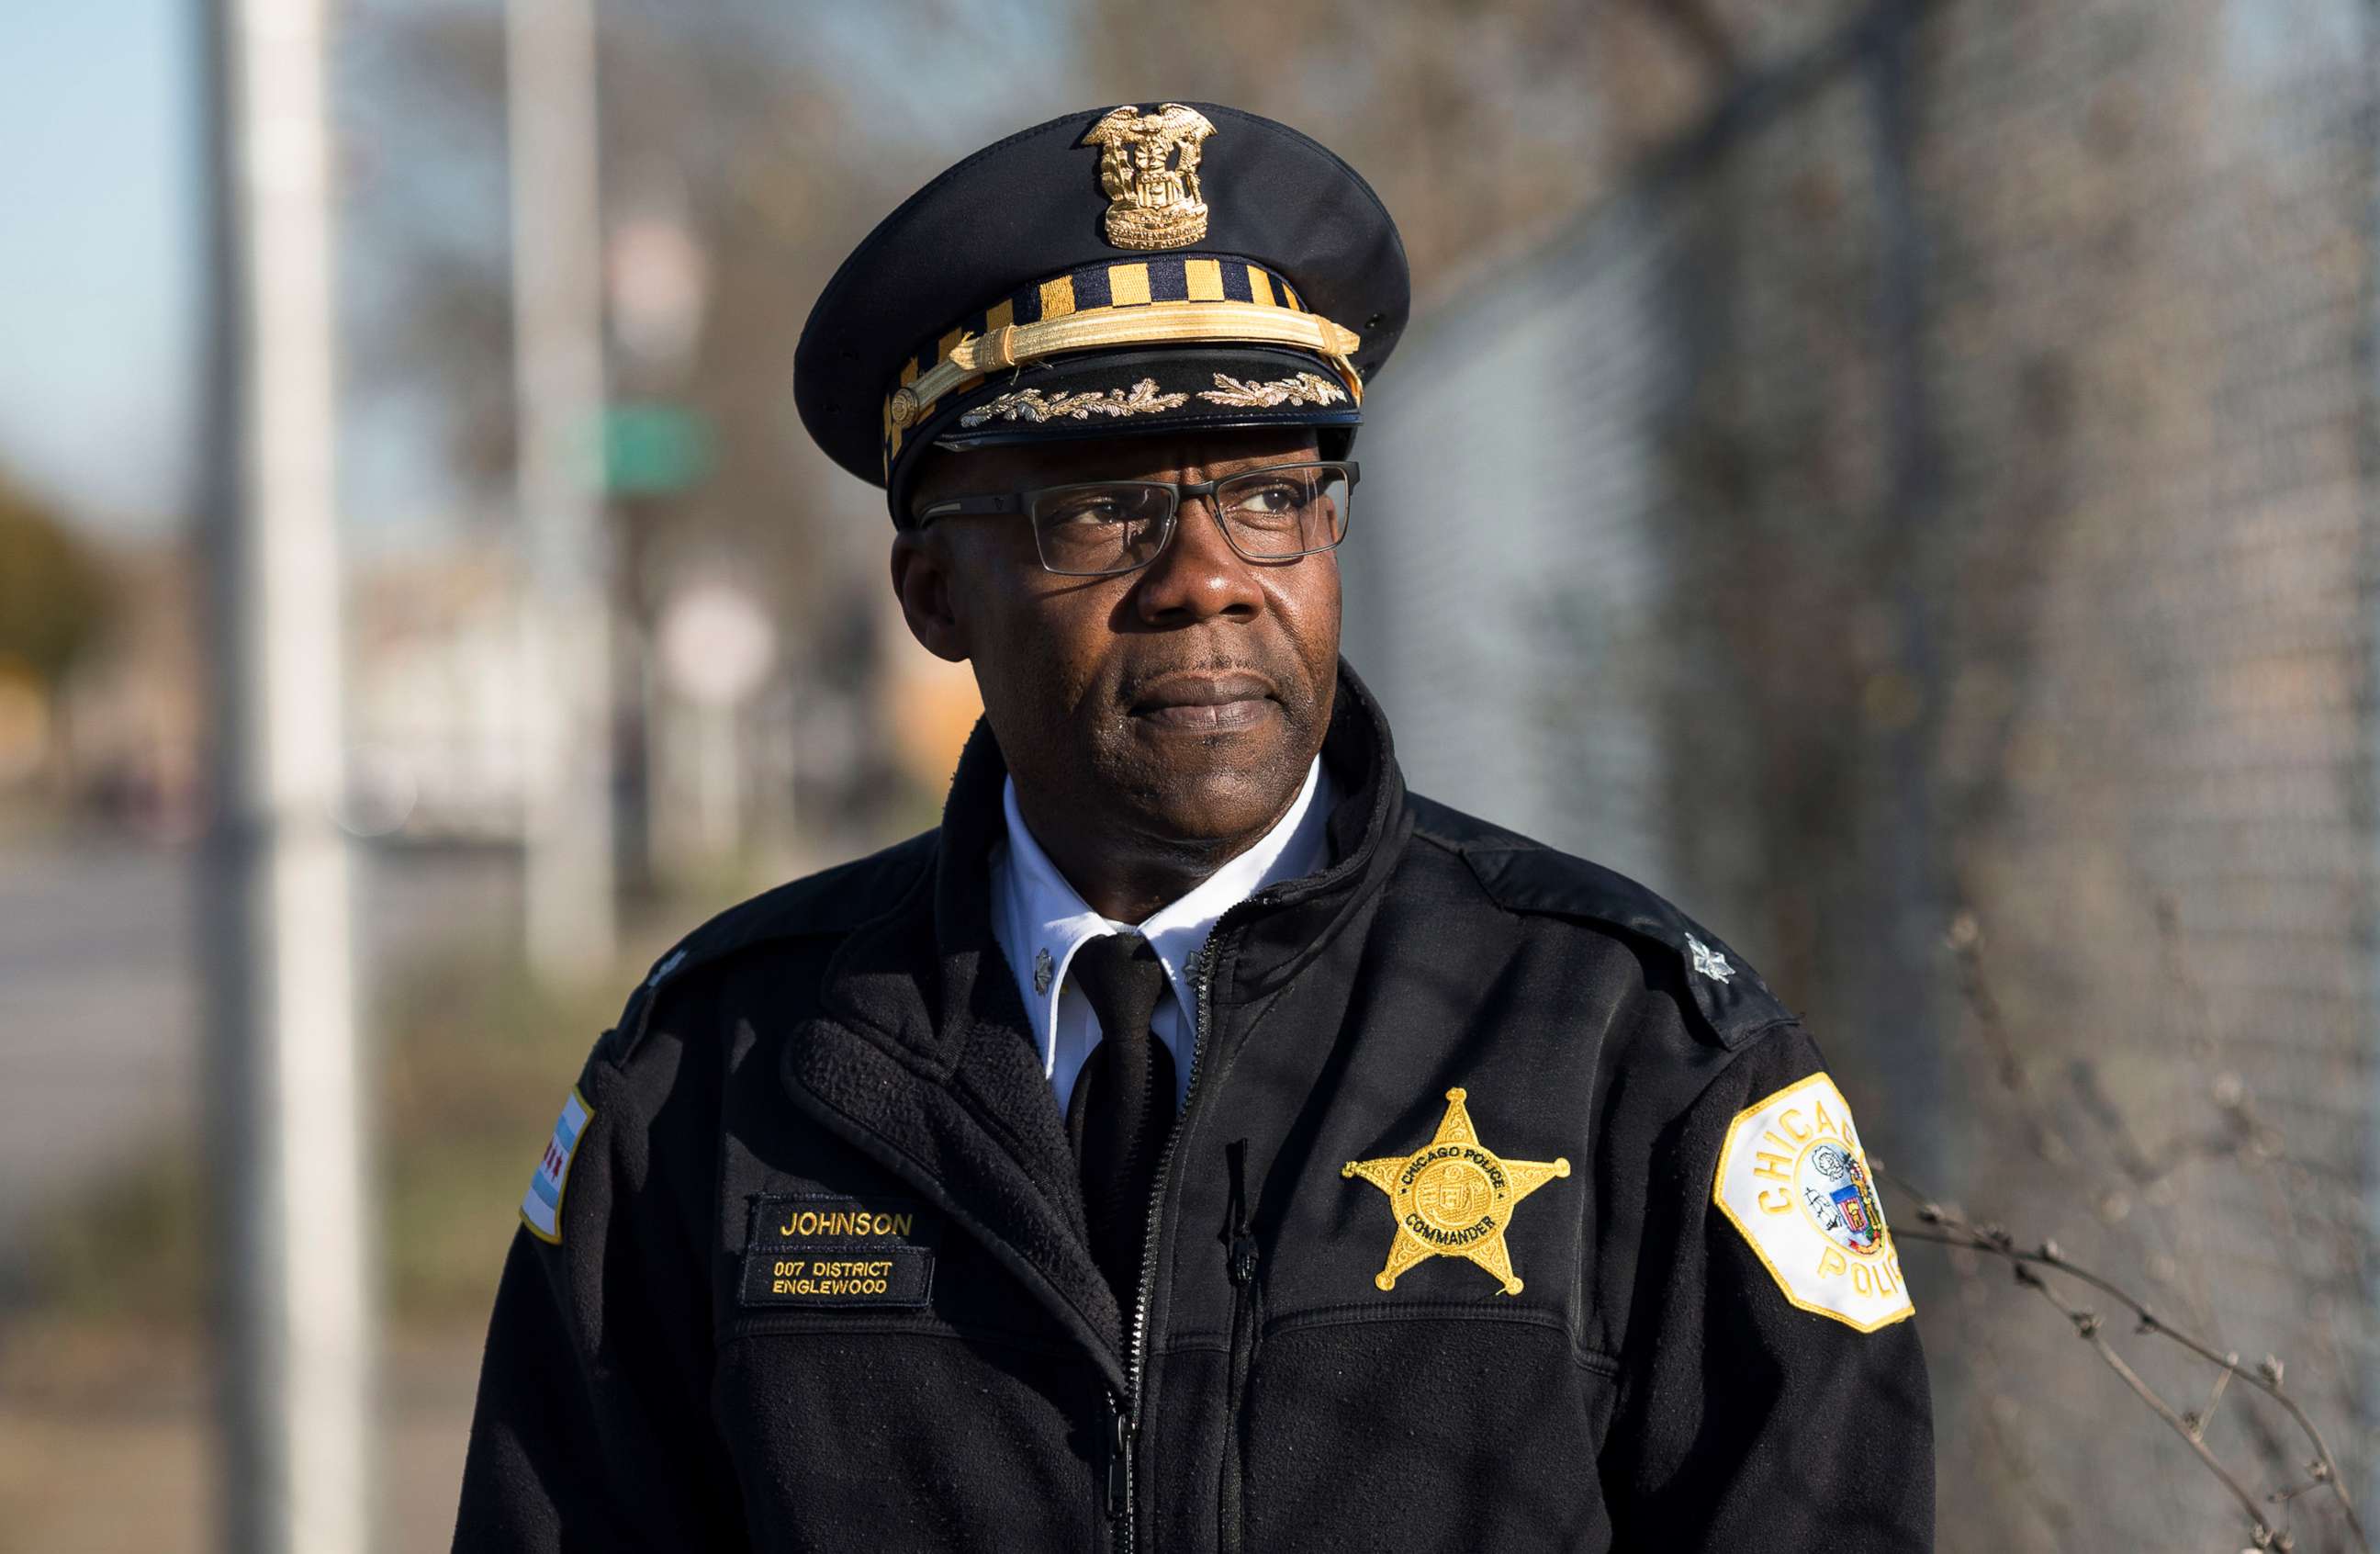 PHOTO: In this Nov. 20, 2017, file photo, Chicago Police Commander Kenneth Johnson is shown near the 7th District Police Station in Chicago's Englewood neighborhood.